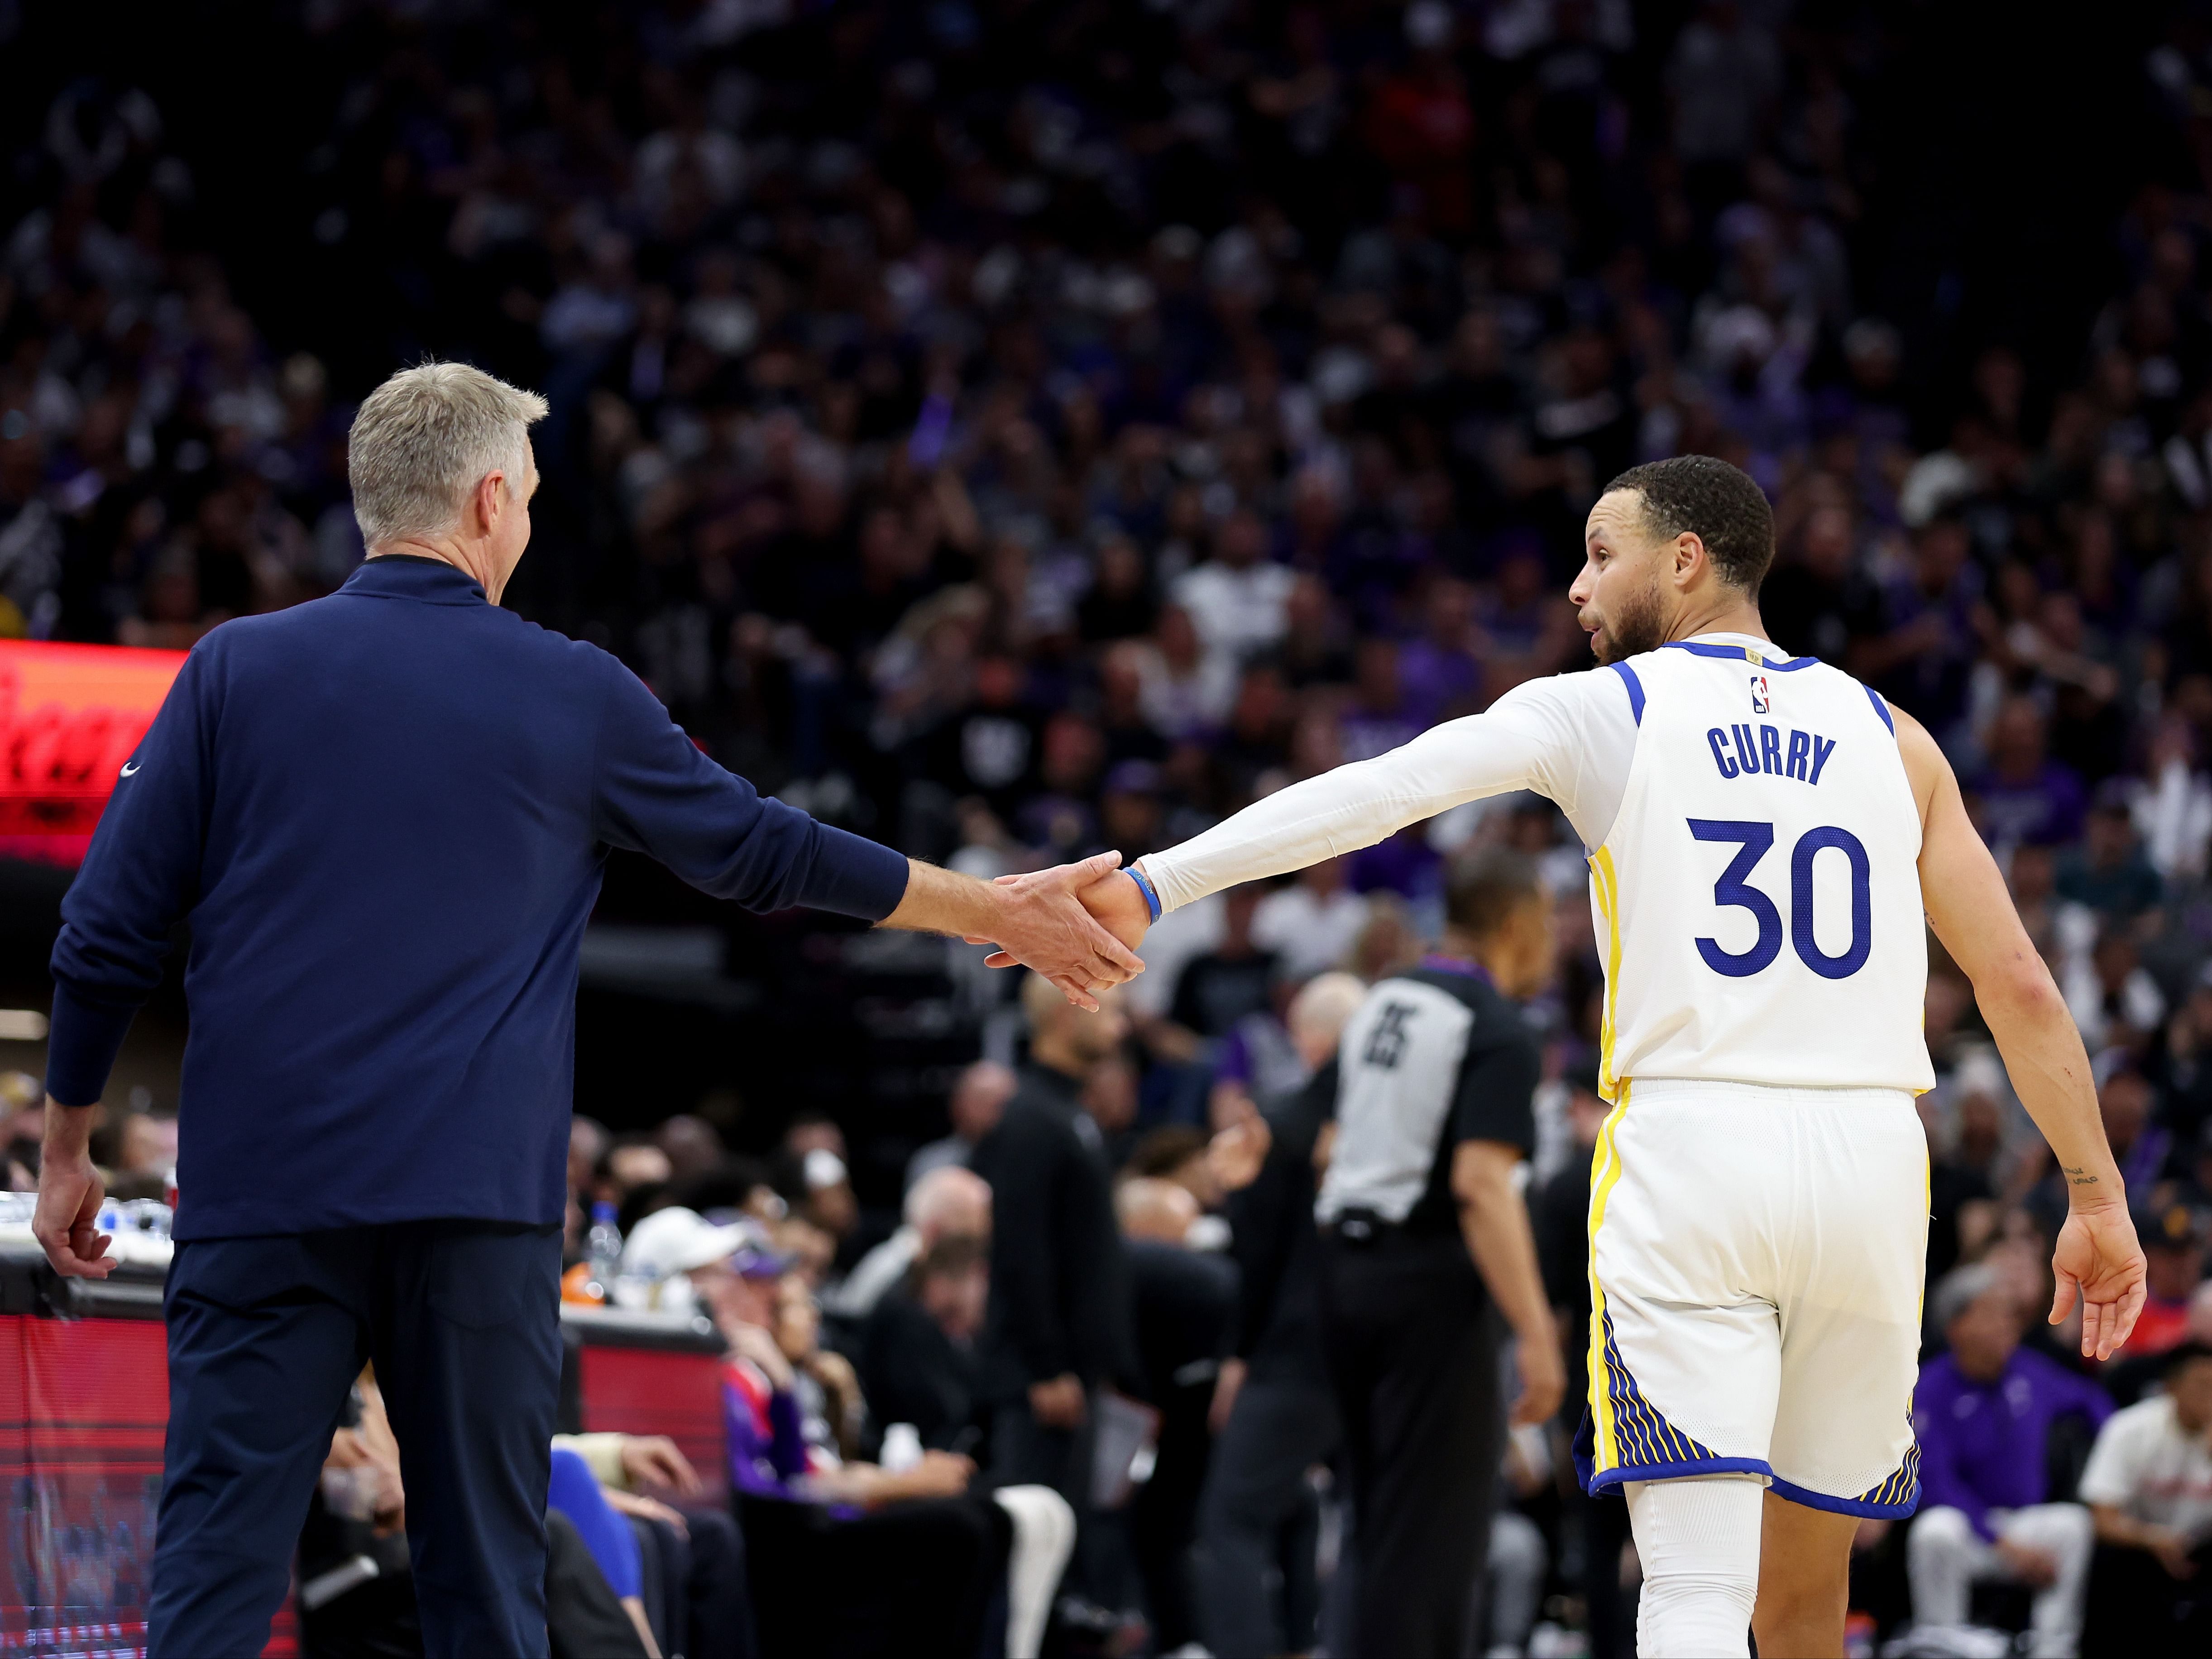 Golden State Warriors coach Steve Kerr and star player Steph Curry